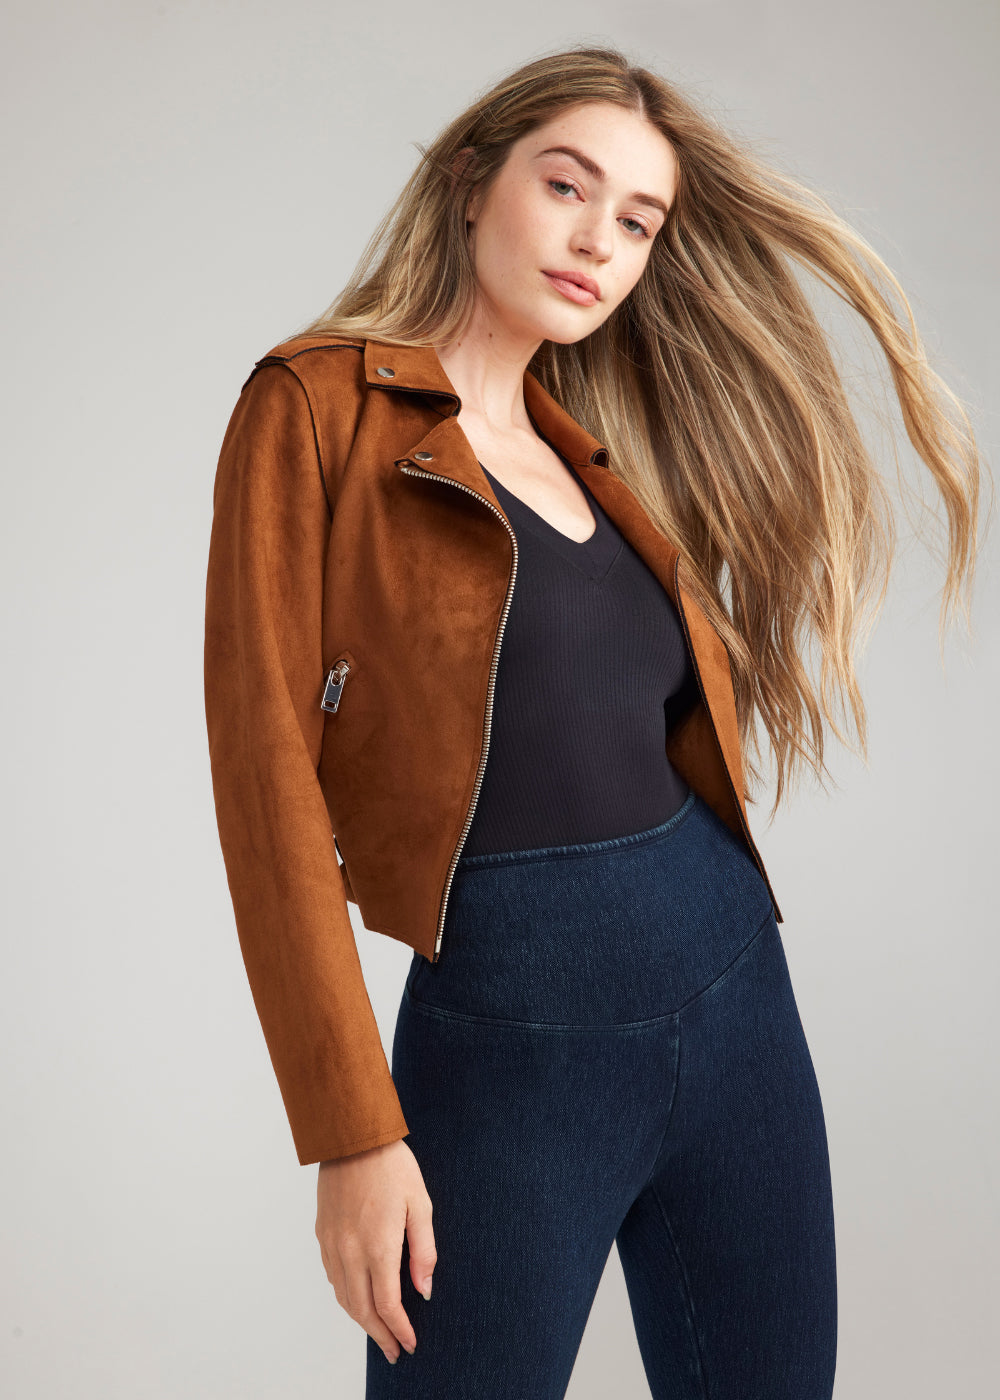 hailey v-neck thong bodysuit - rib seamless in Black, denim bootcut shaping legging in True Indigo and a suede jacket in tan worn by a woman standing slightly to the side Yummie